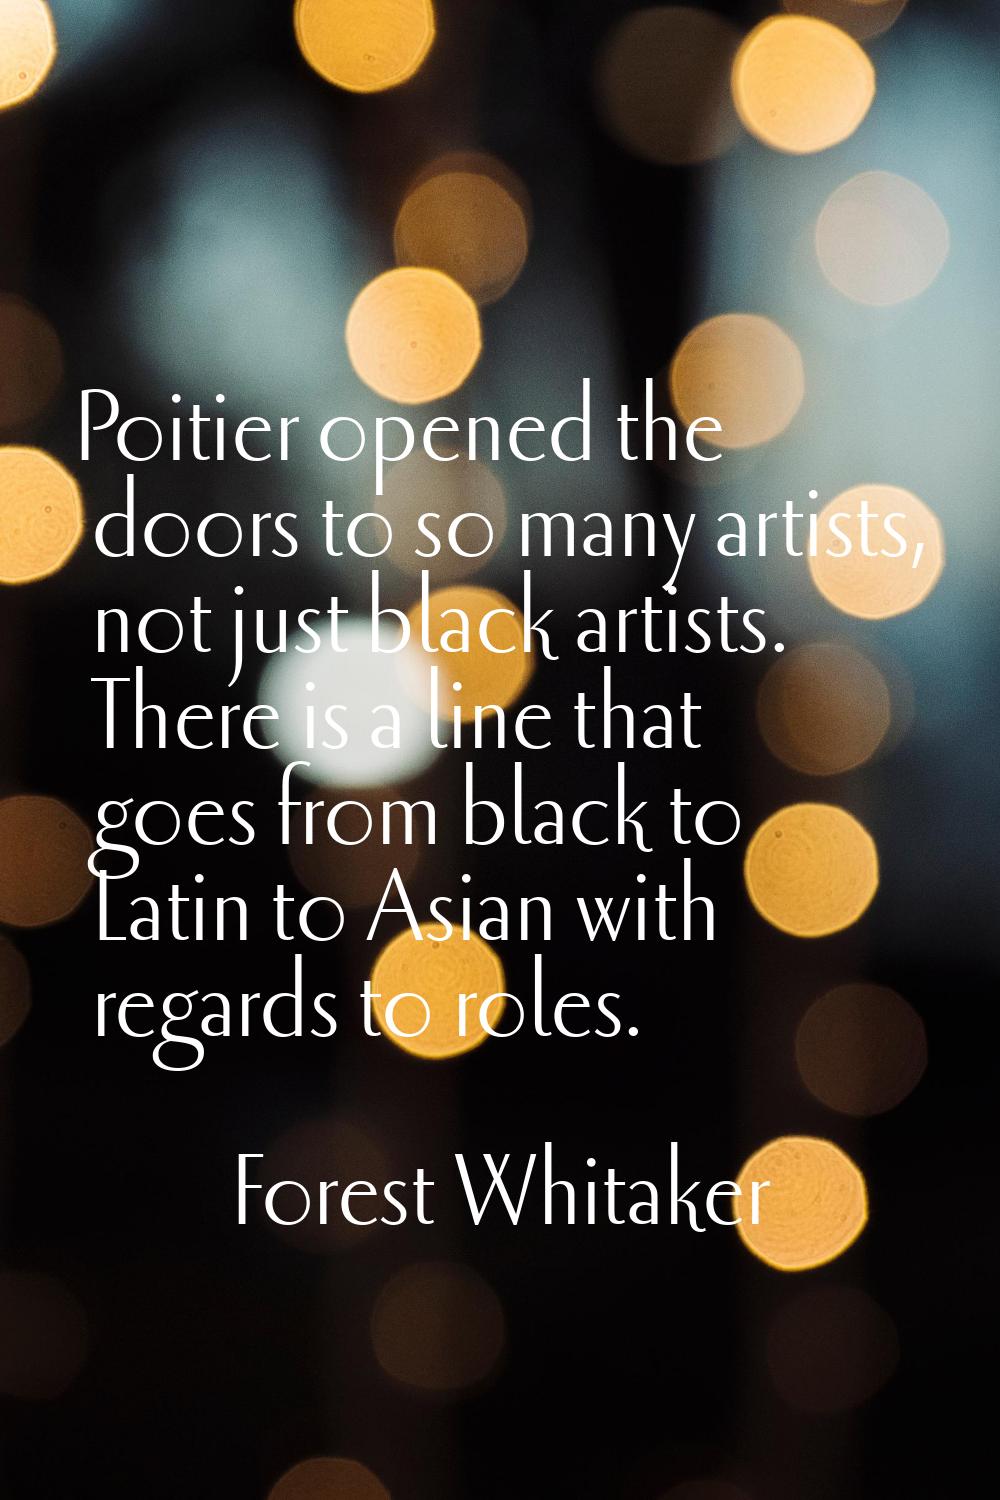 Poitier opened the doors to so many artists, not just black artists. There is a line that goes from